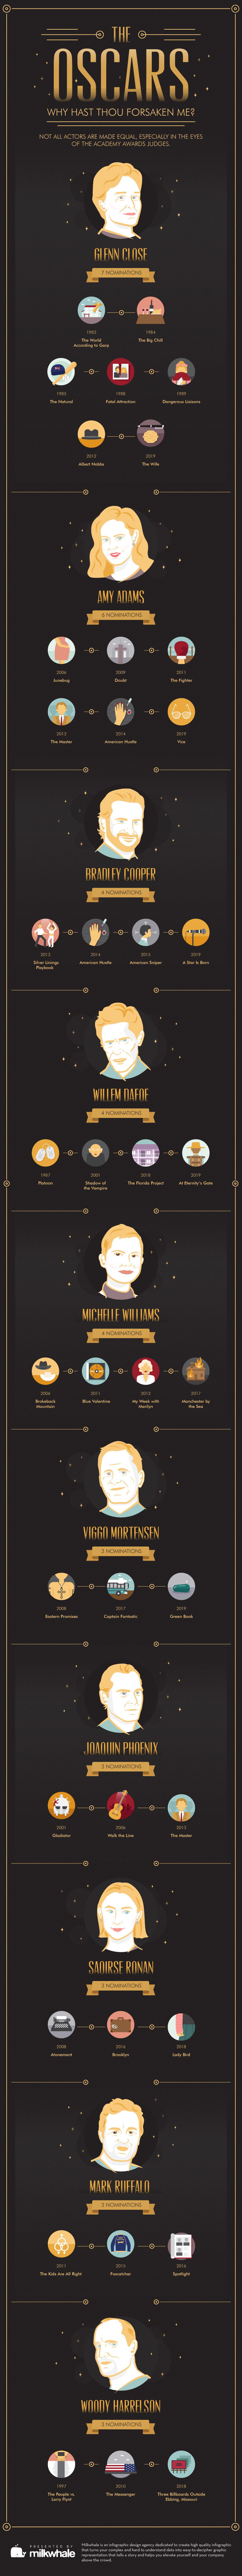 Infographic for The Oscars - Why Hast Thou Forsaken Me?